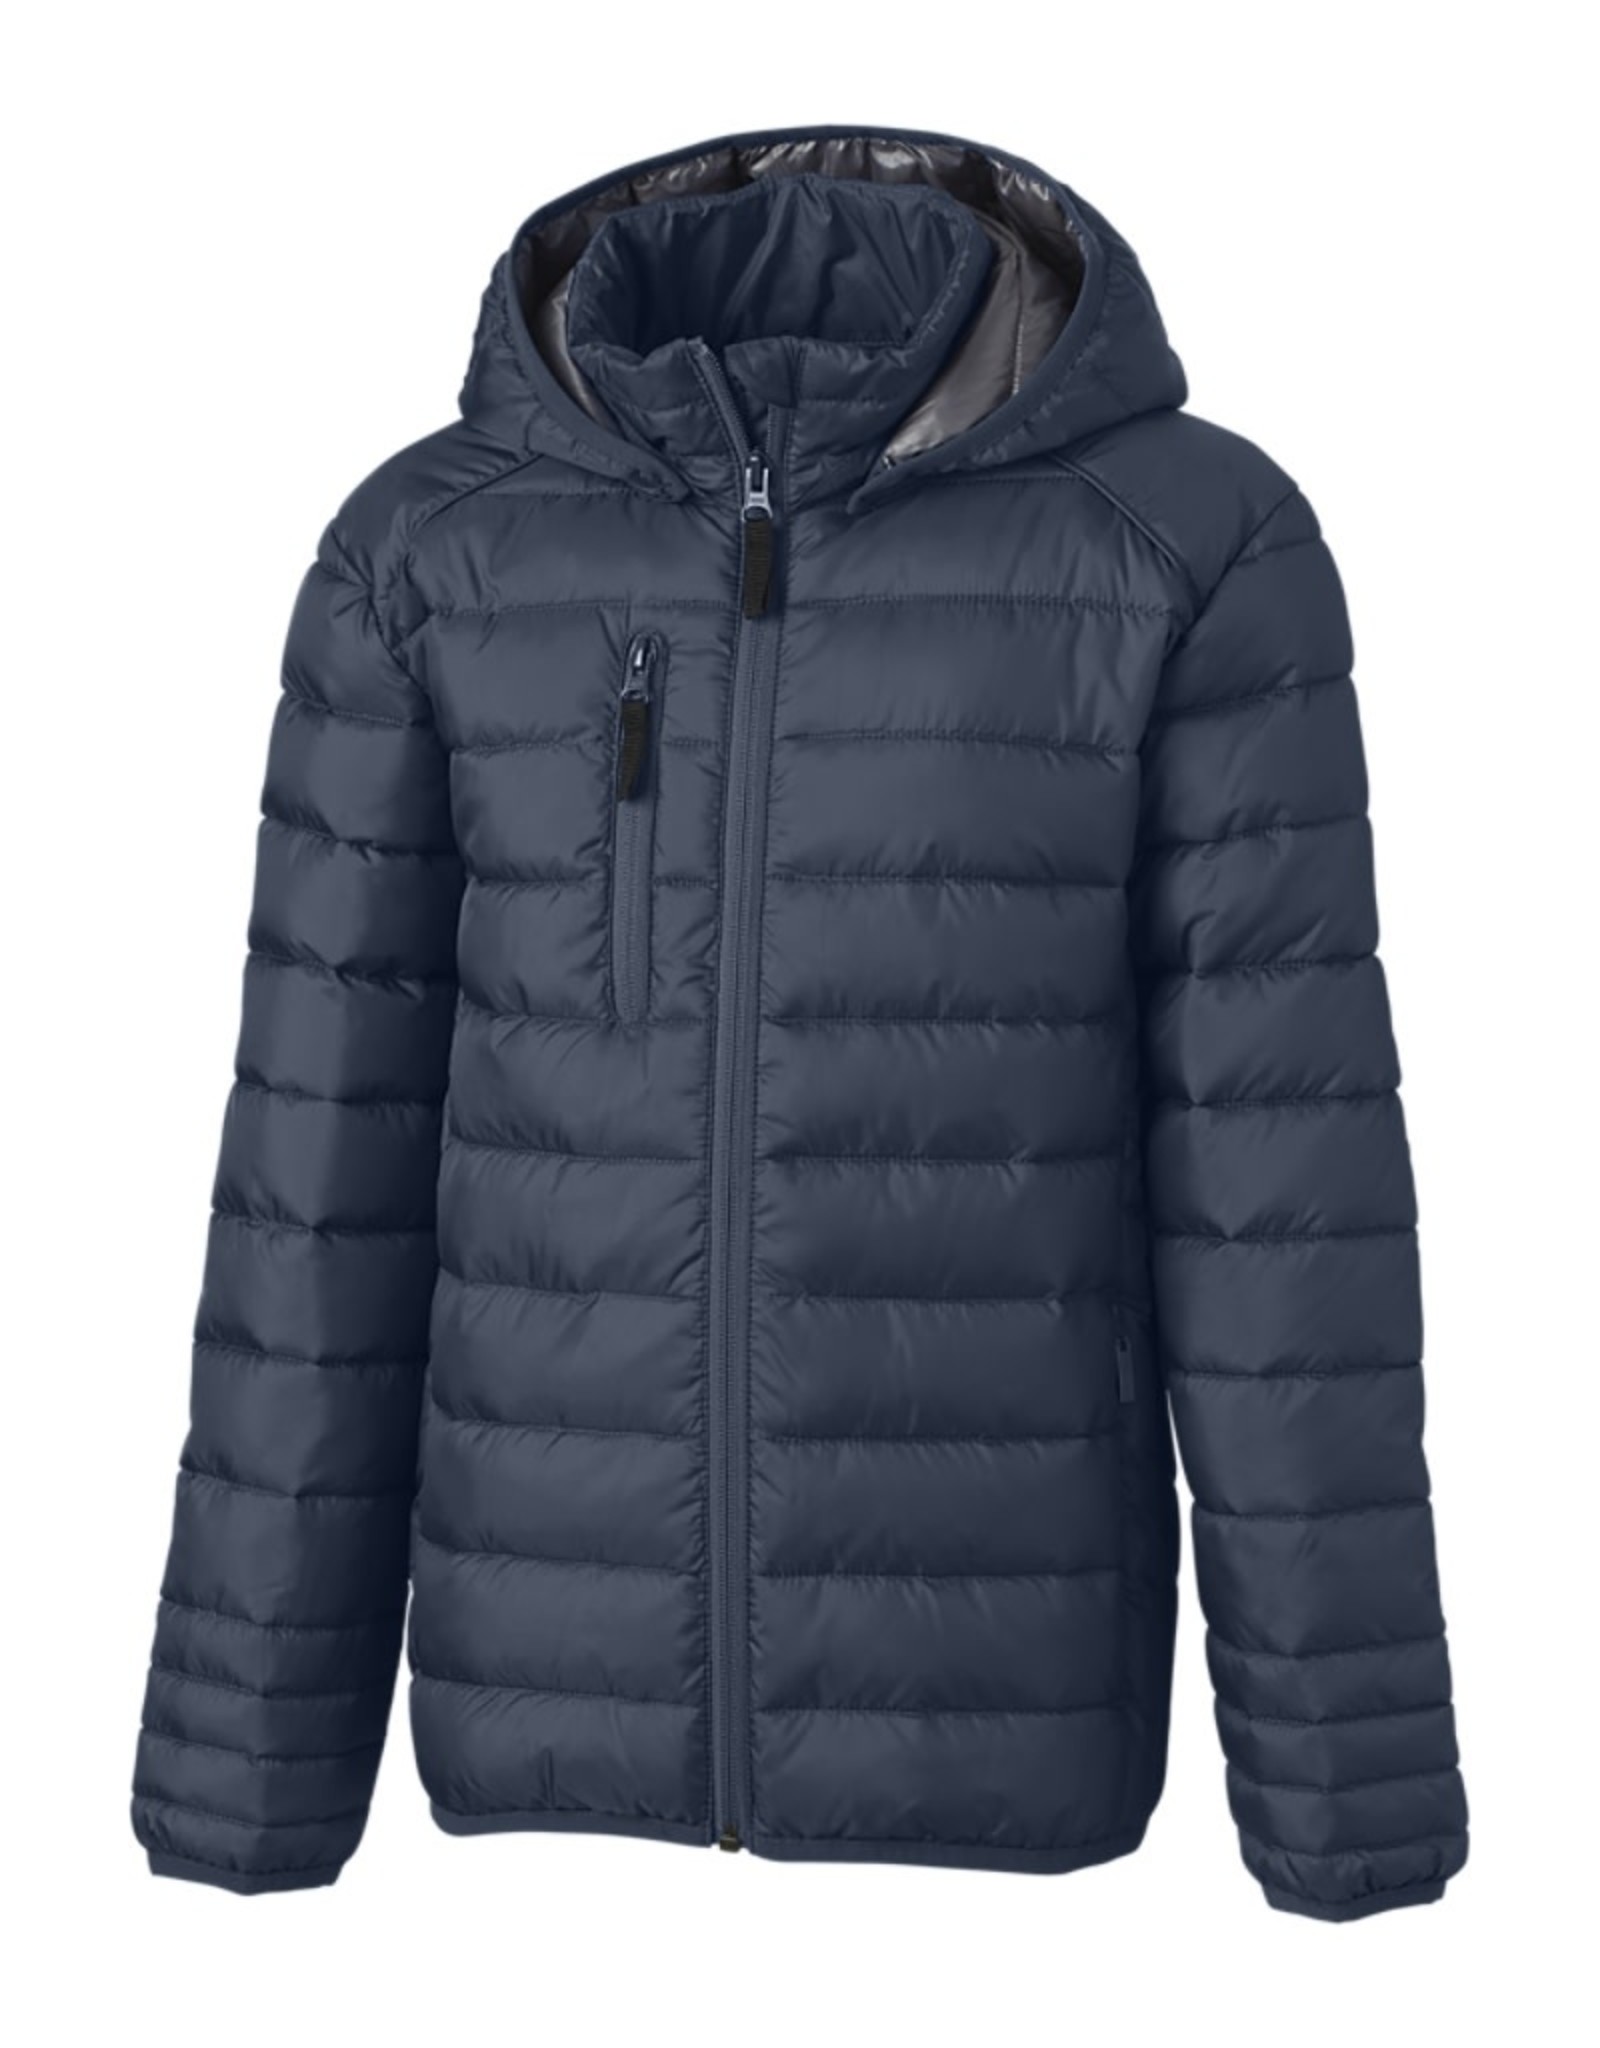 Clique Puffer Jacket - Adult